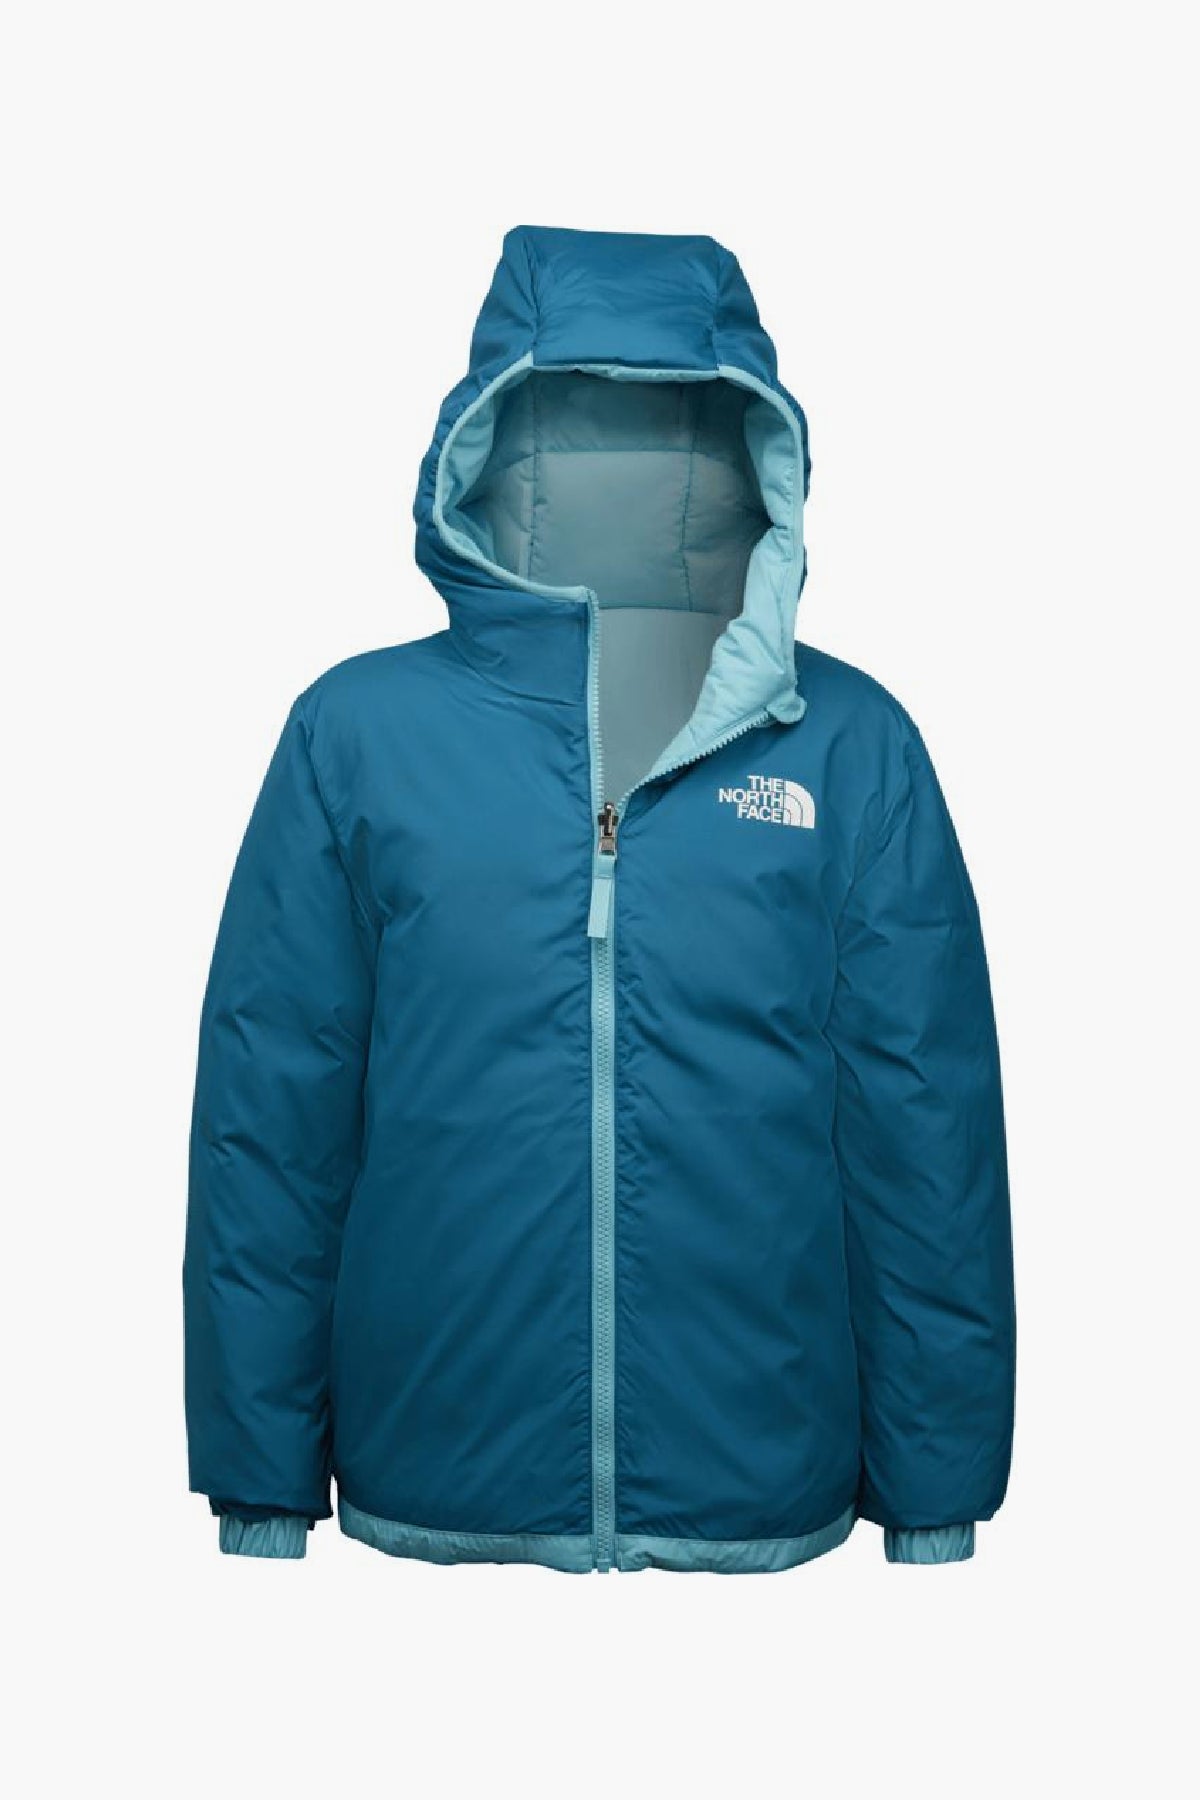 The North Face Kids Hyalite Down Jacket - Transantarctic Blue